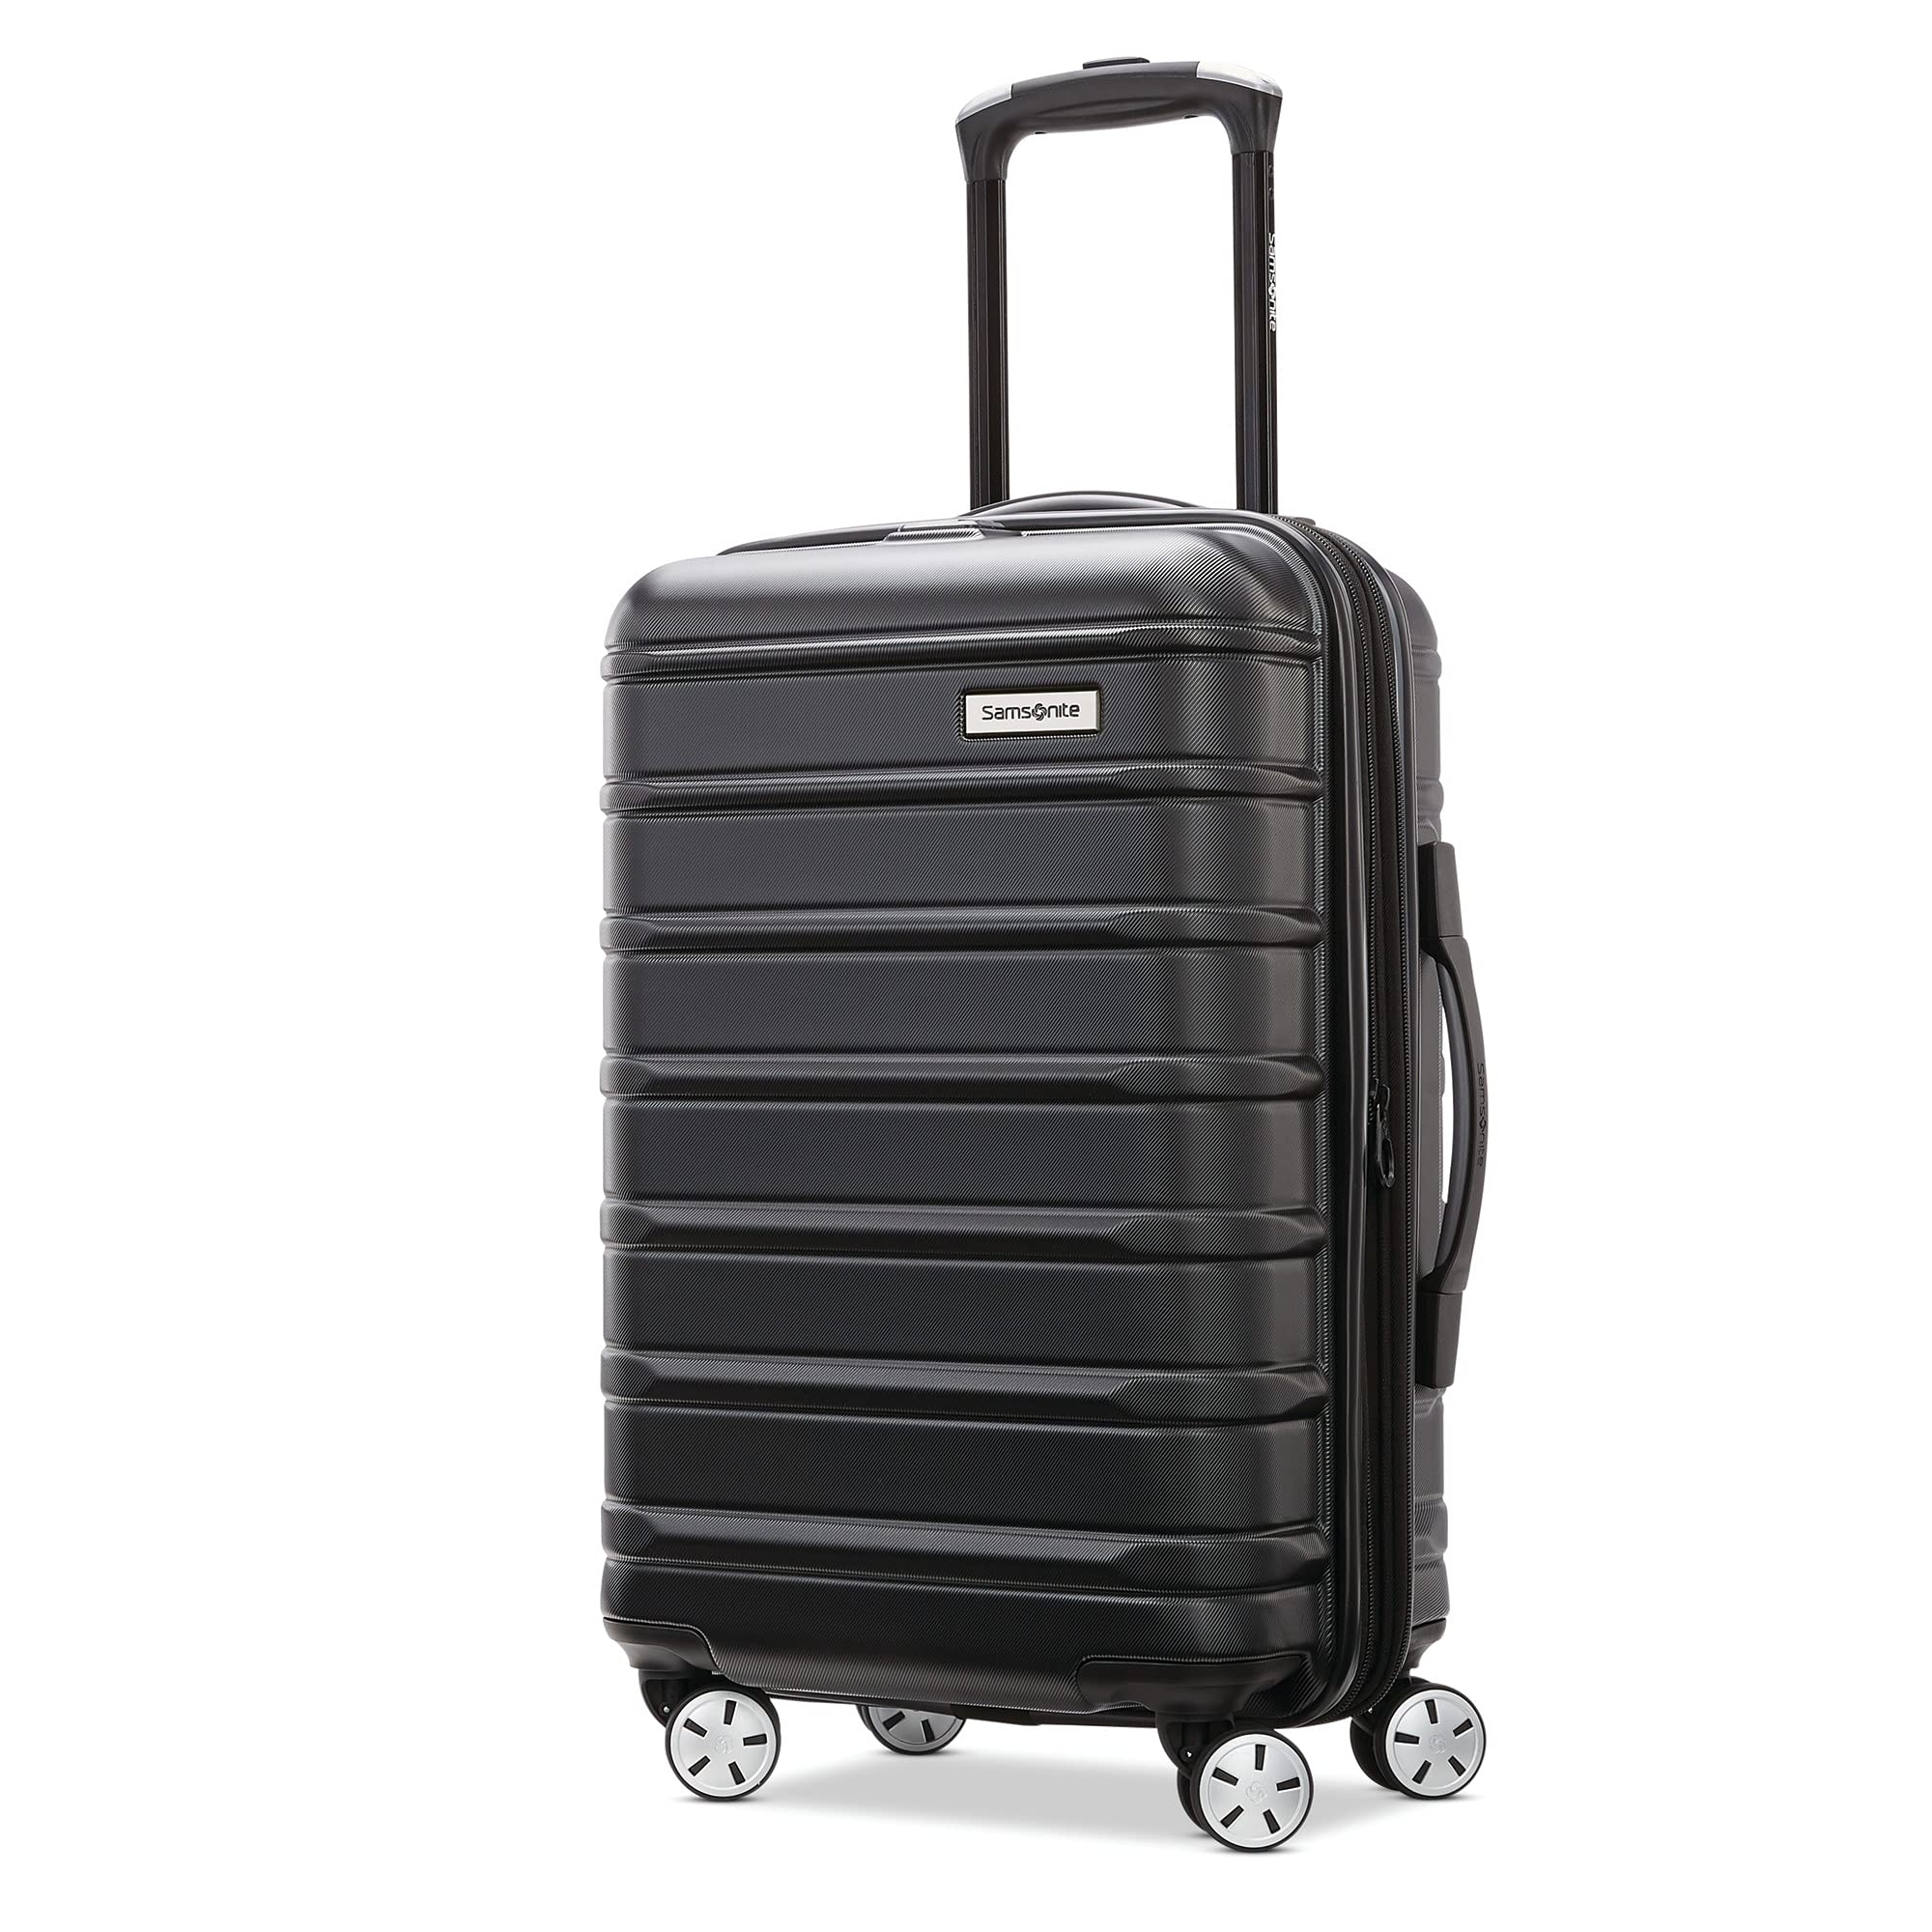 20" Samsonite Omni 2 Hardside Expandable Spinner Carry-On Luggage (Midnight Black) $74.90 + Free Shipping